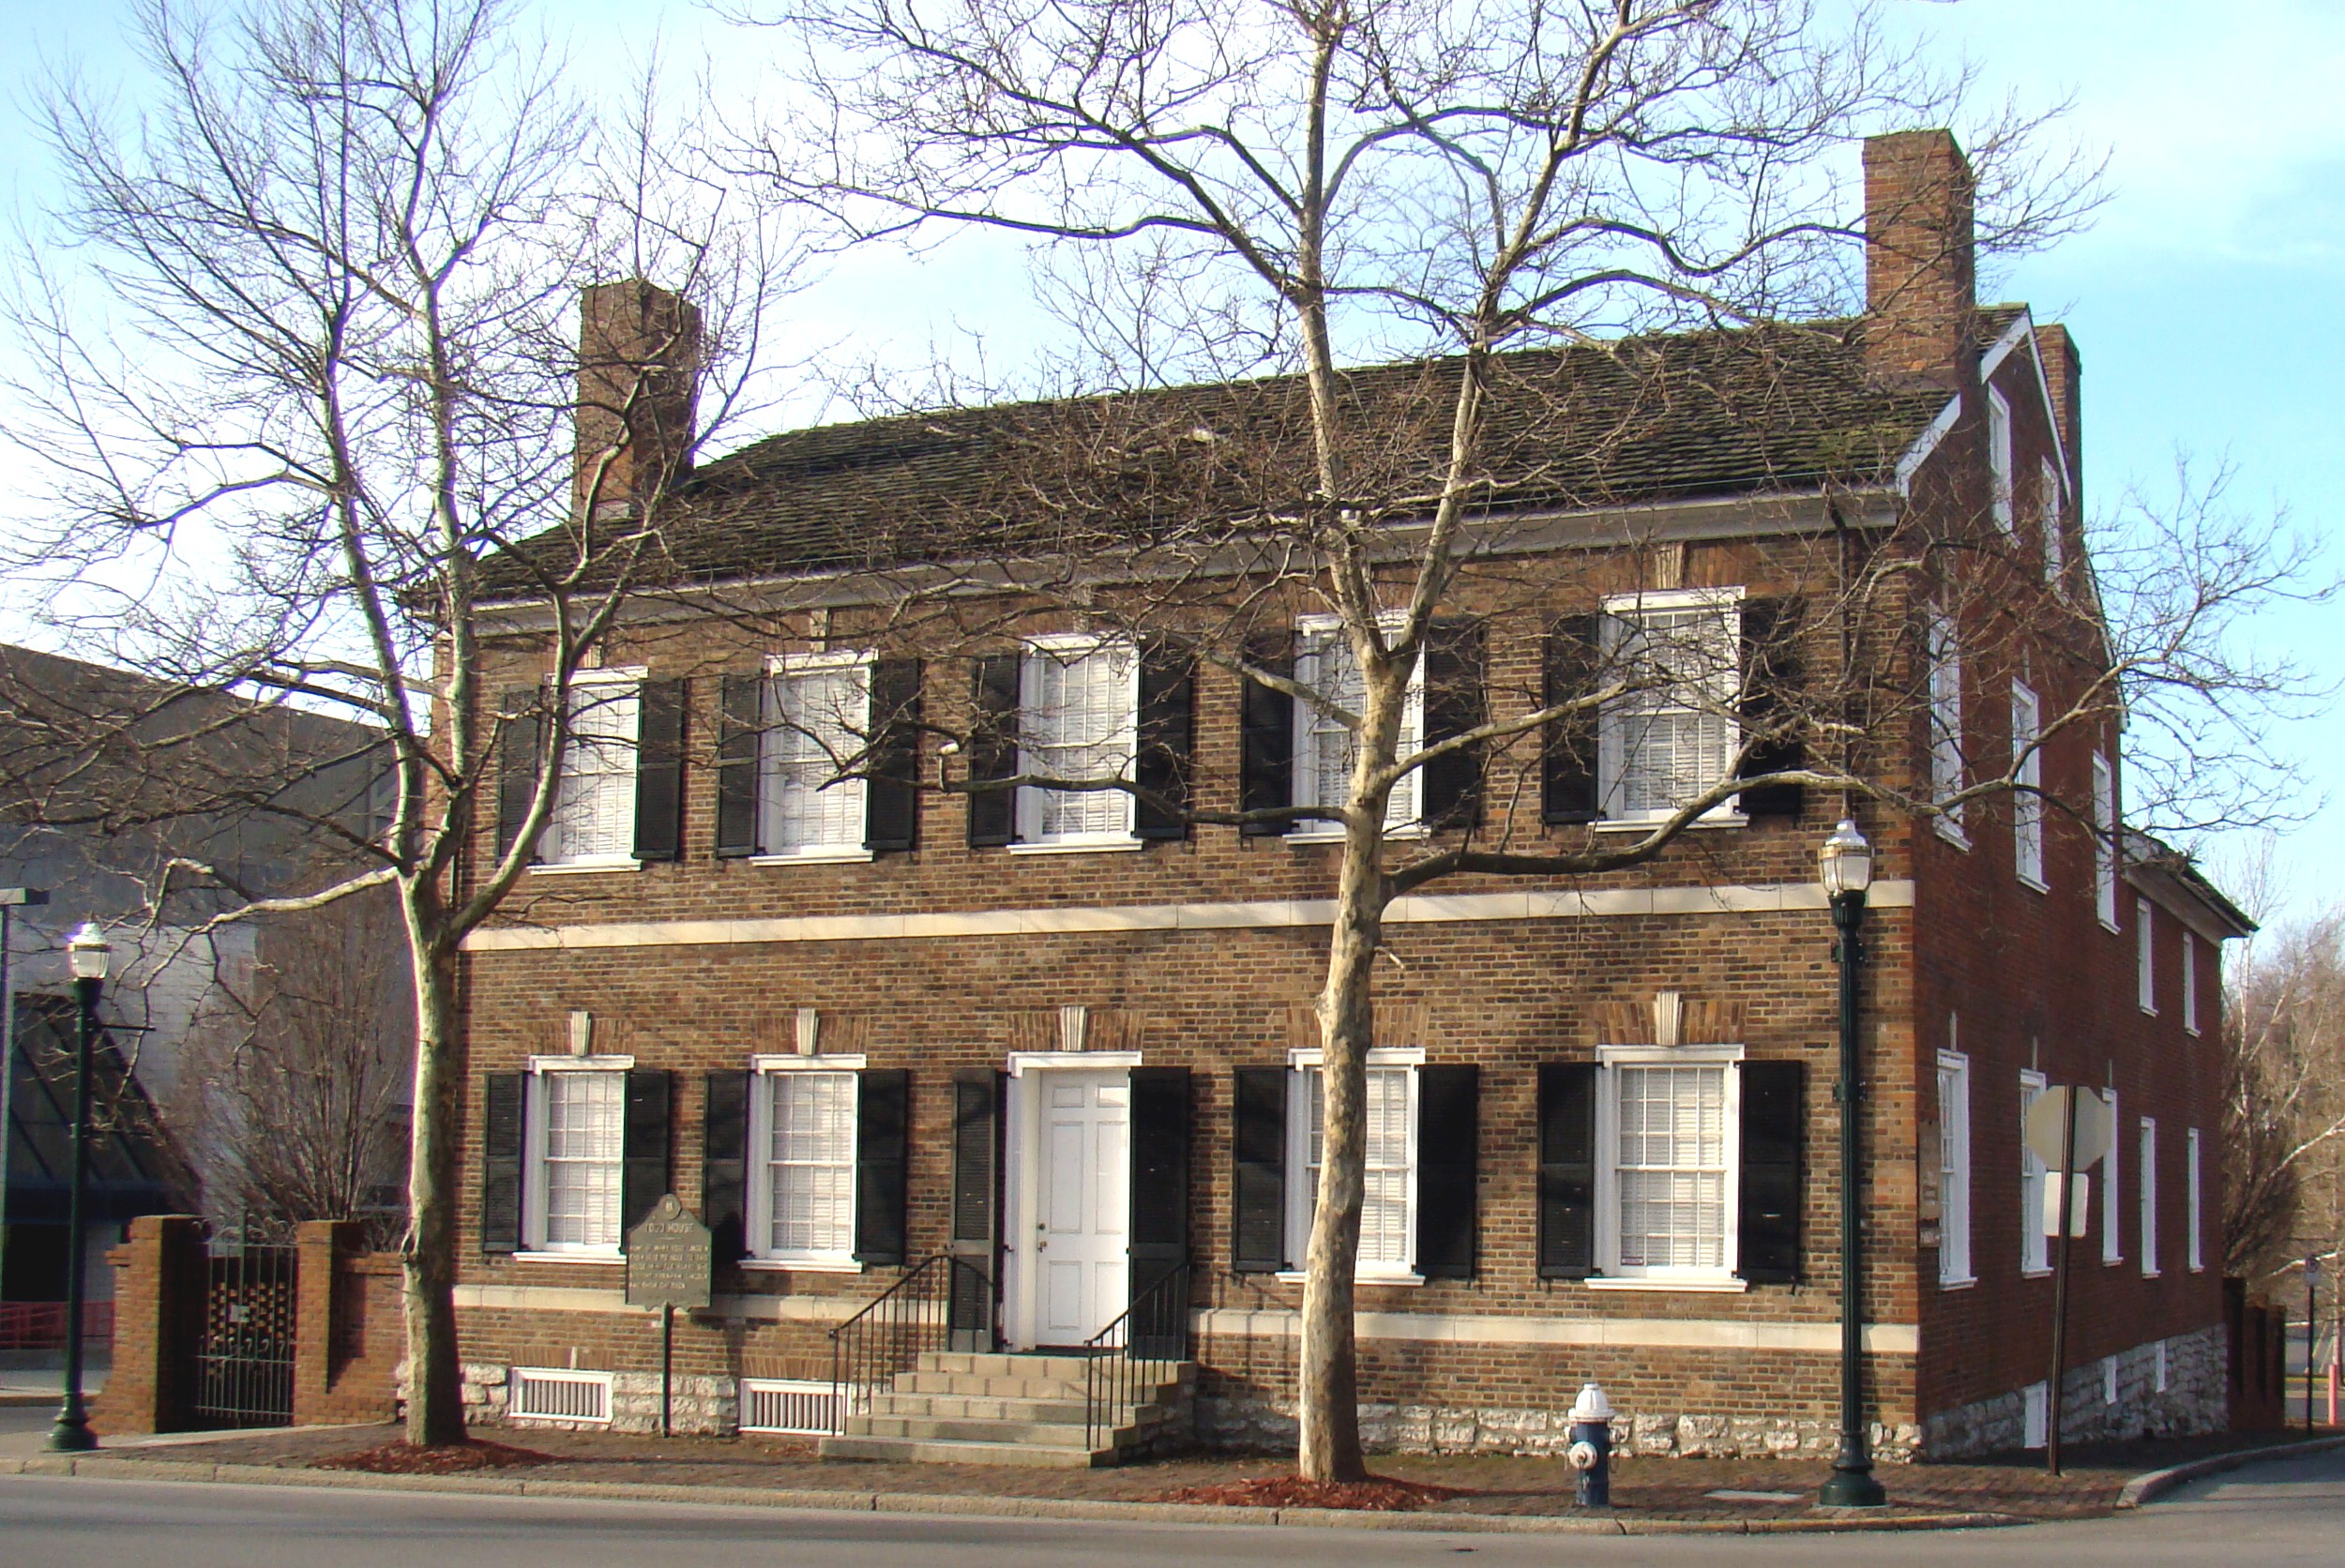 The restored childhood home of Mary Todd Lincoln in Lexington, Kentucky.